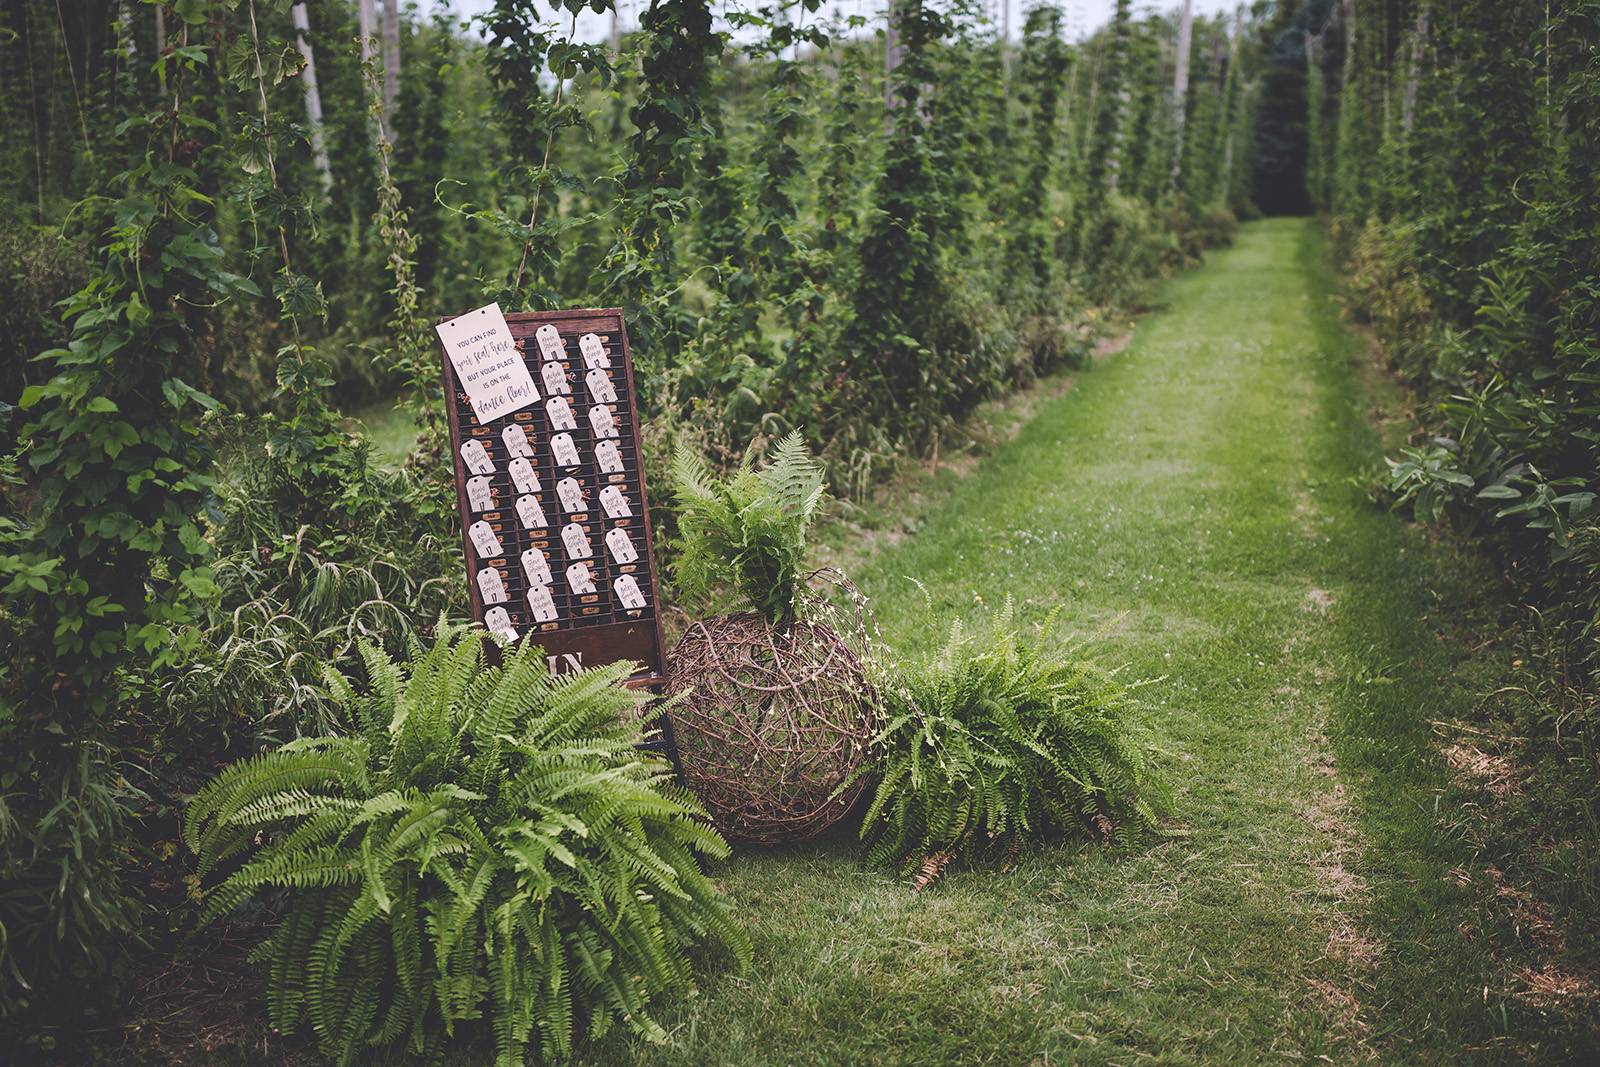 hops garden outdoor wedding escort card display seating chart assignment display place cards